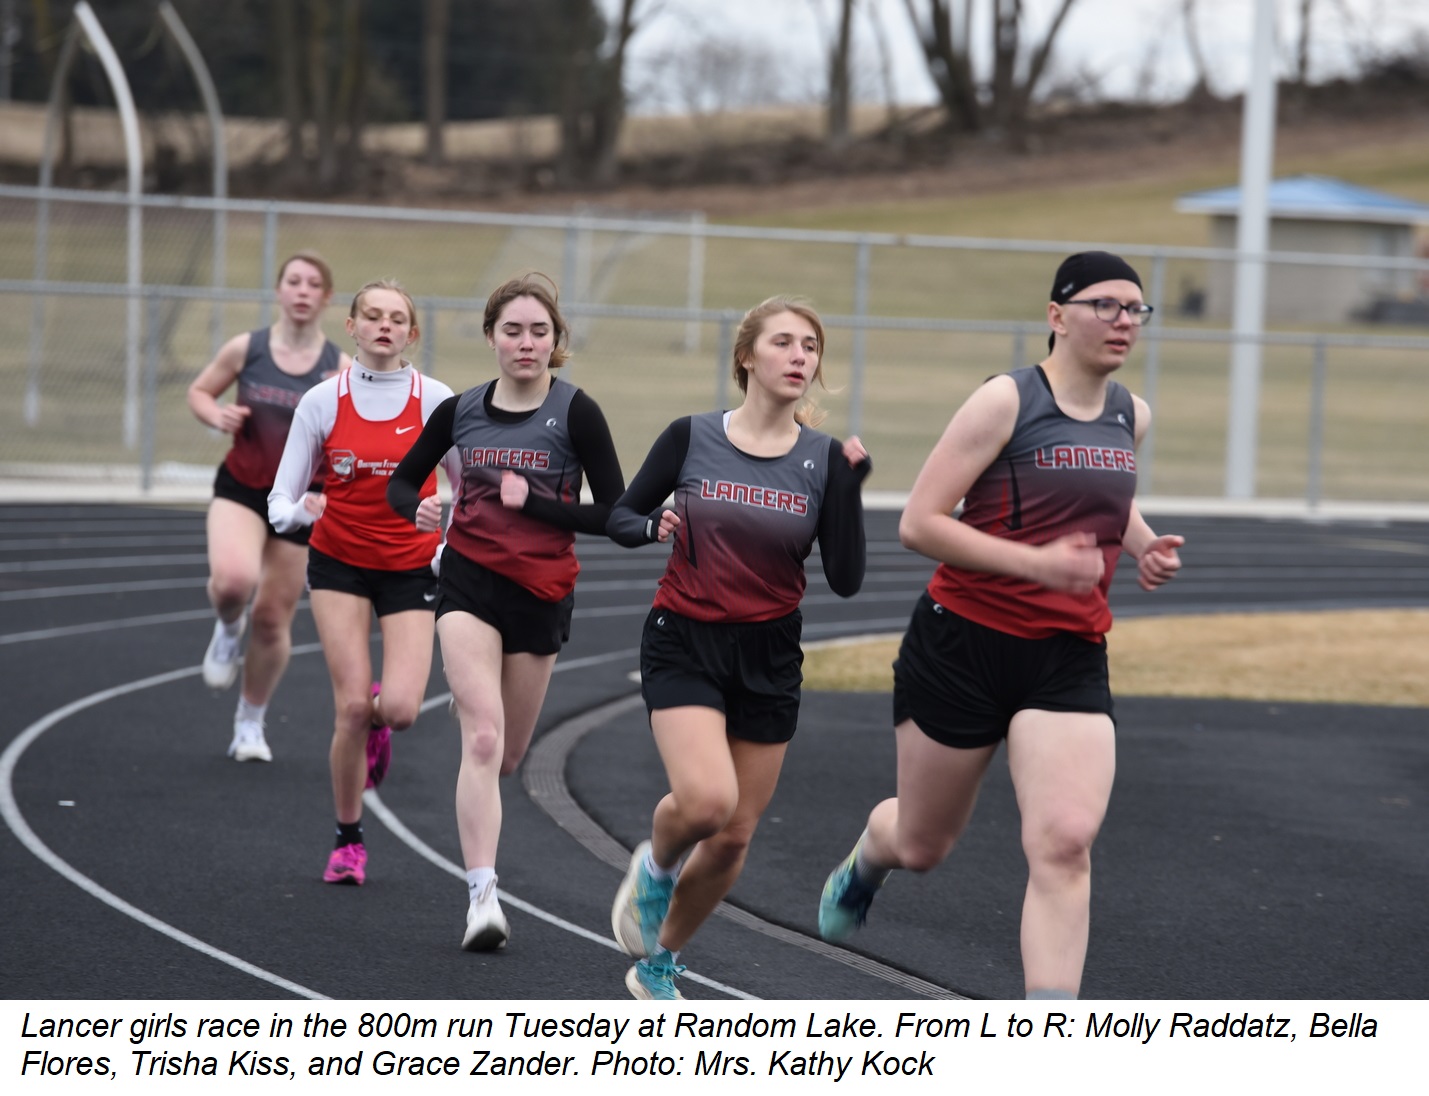 Lancer girls race in the 800m run at Random Lake Tuesday. From L to R: Molly Raddatz, Bella Flores, Trisha Kiss, and Grace Zander.